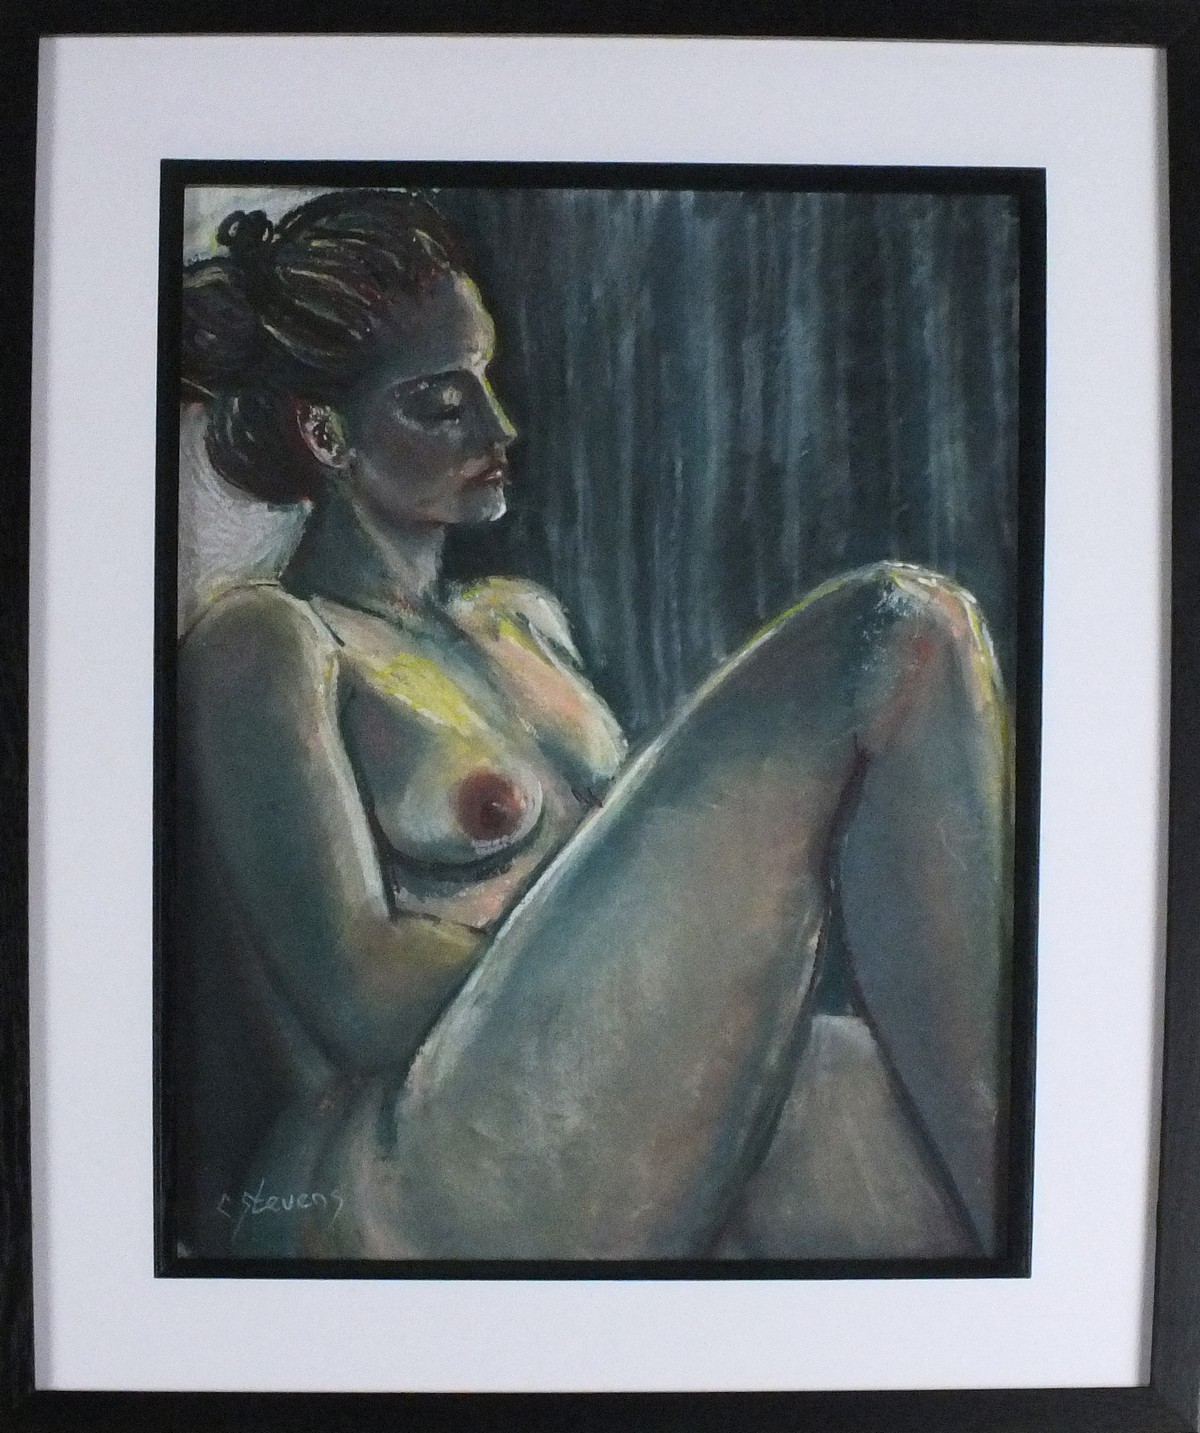 Colin STEVENS (British b. 1950) Seated Nude, Pastel on paper, Signed lower left, 15.25" x 11.25" ( - Image 2 of 2